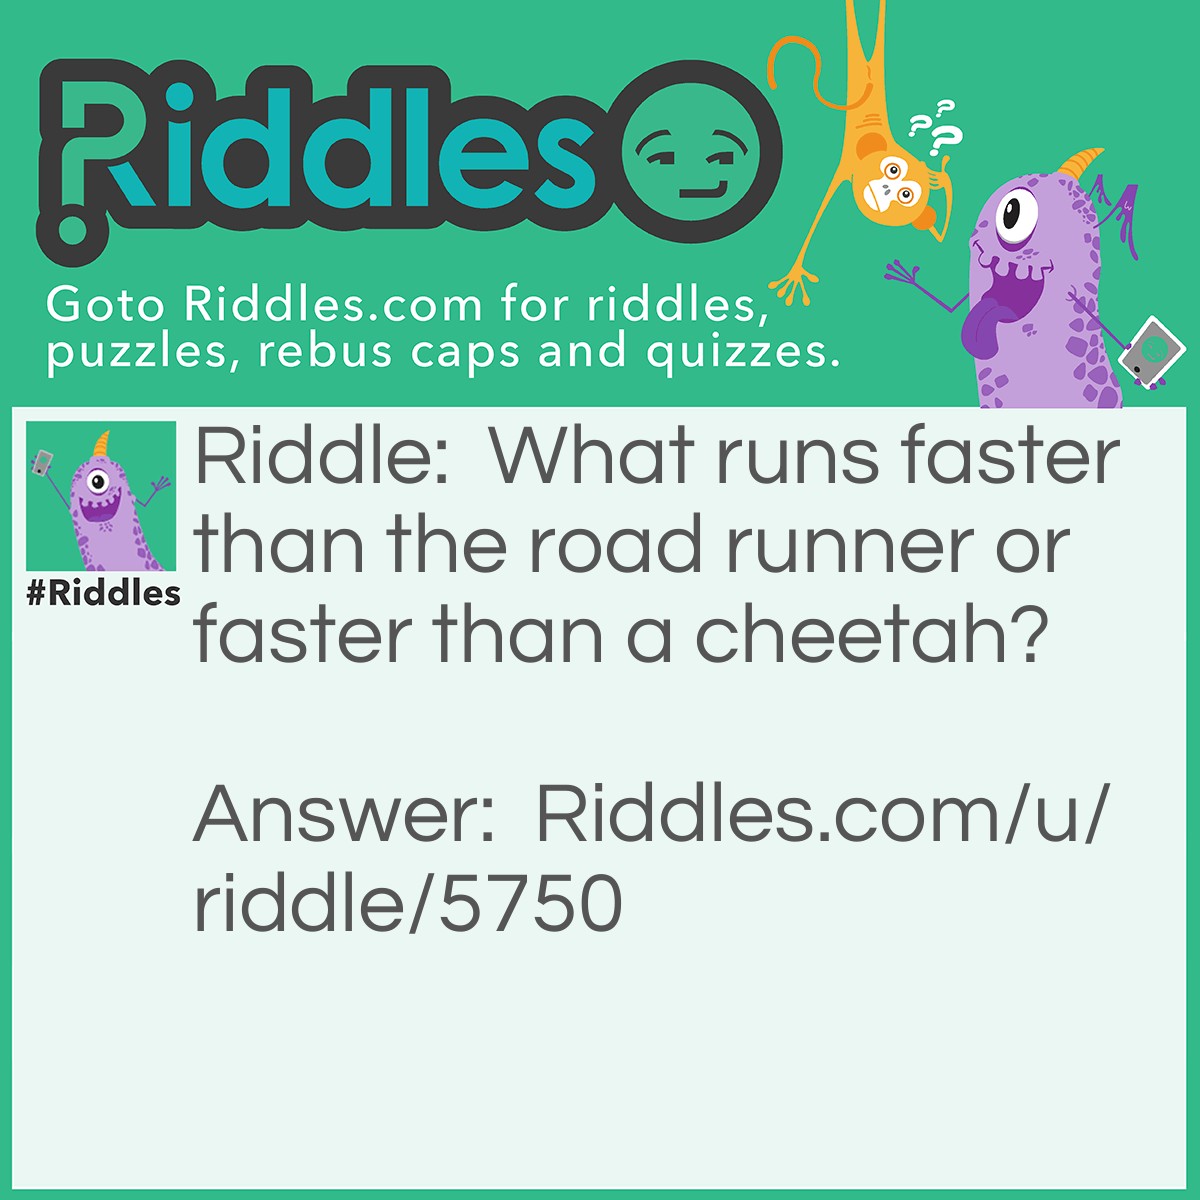 Riddle: What runs faster than the road runner or faster than a cheetah? Answer: The flash!